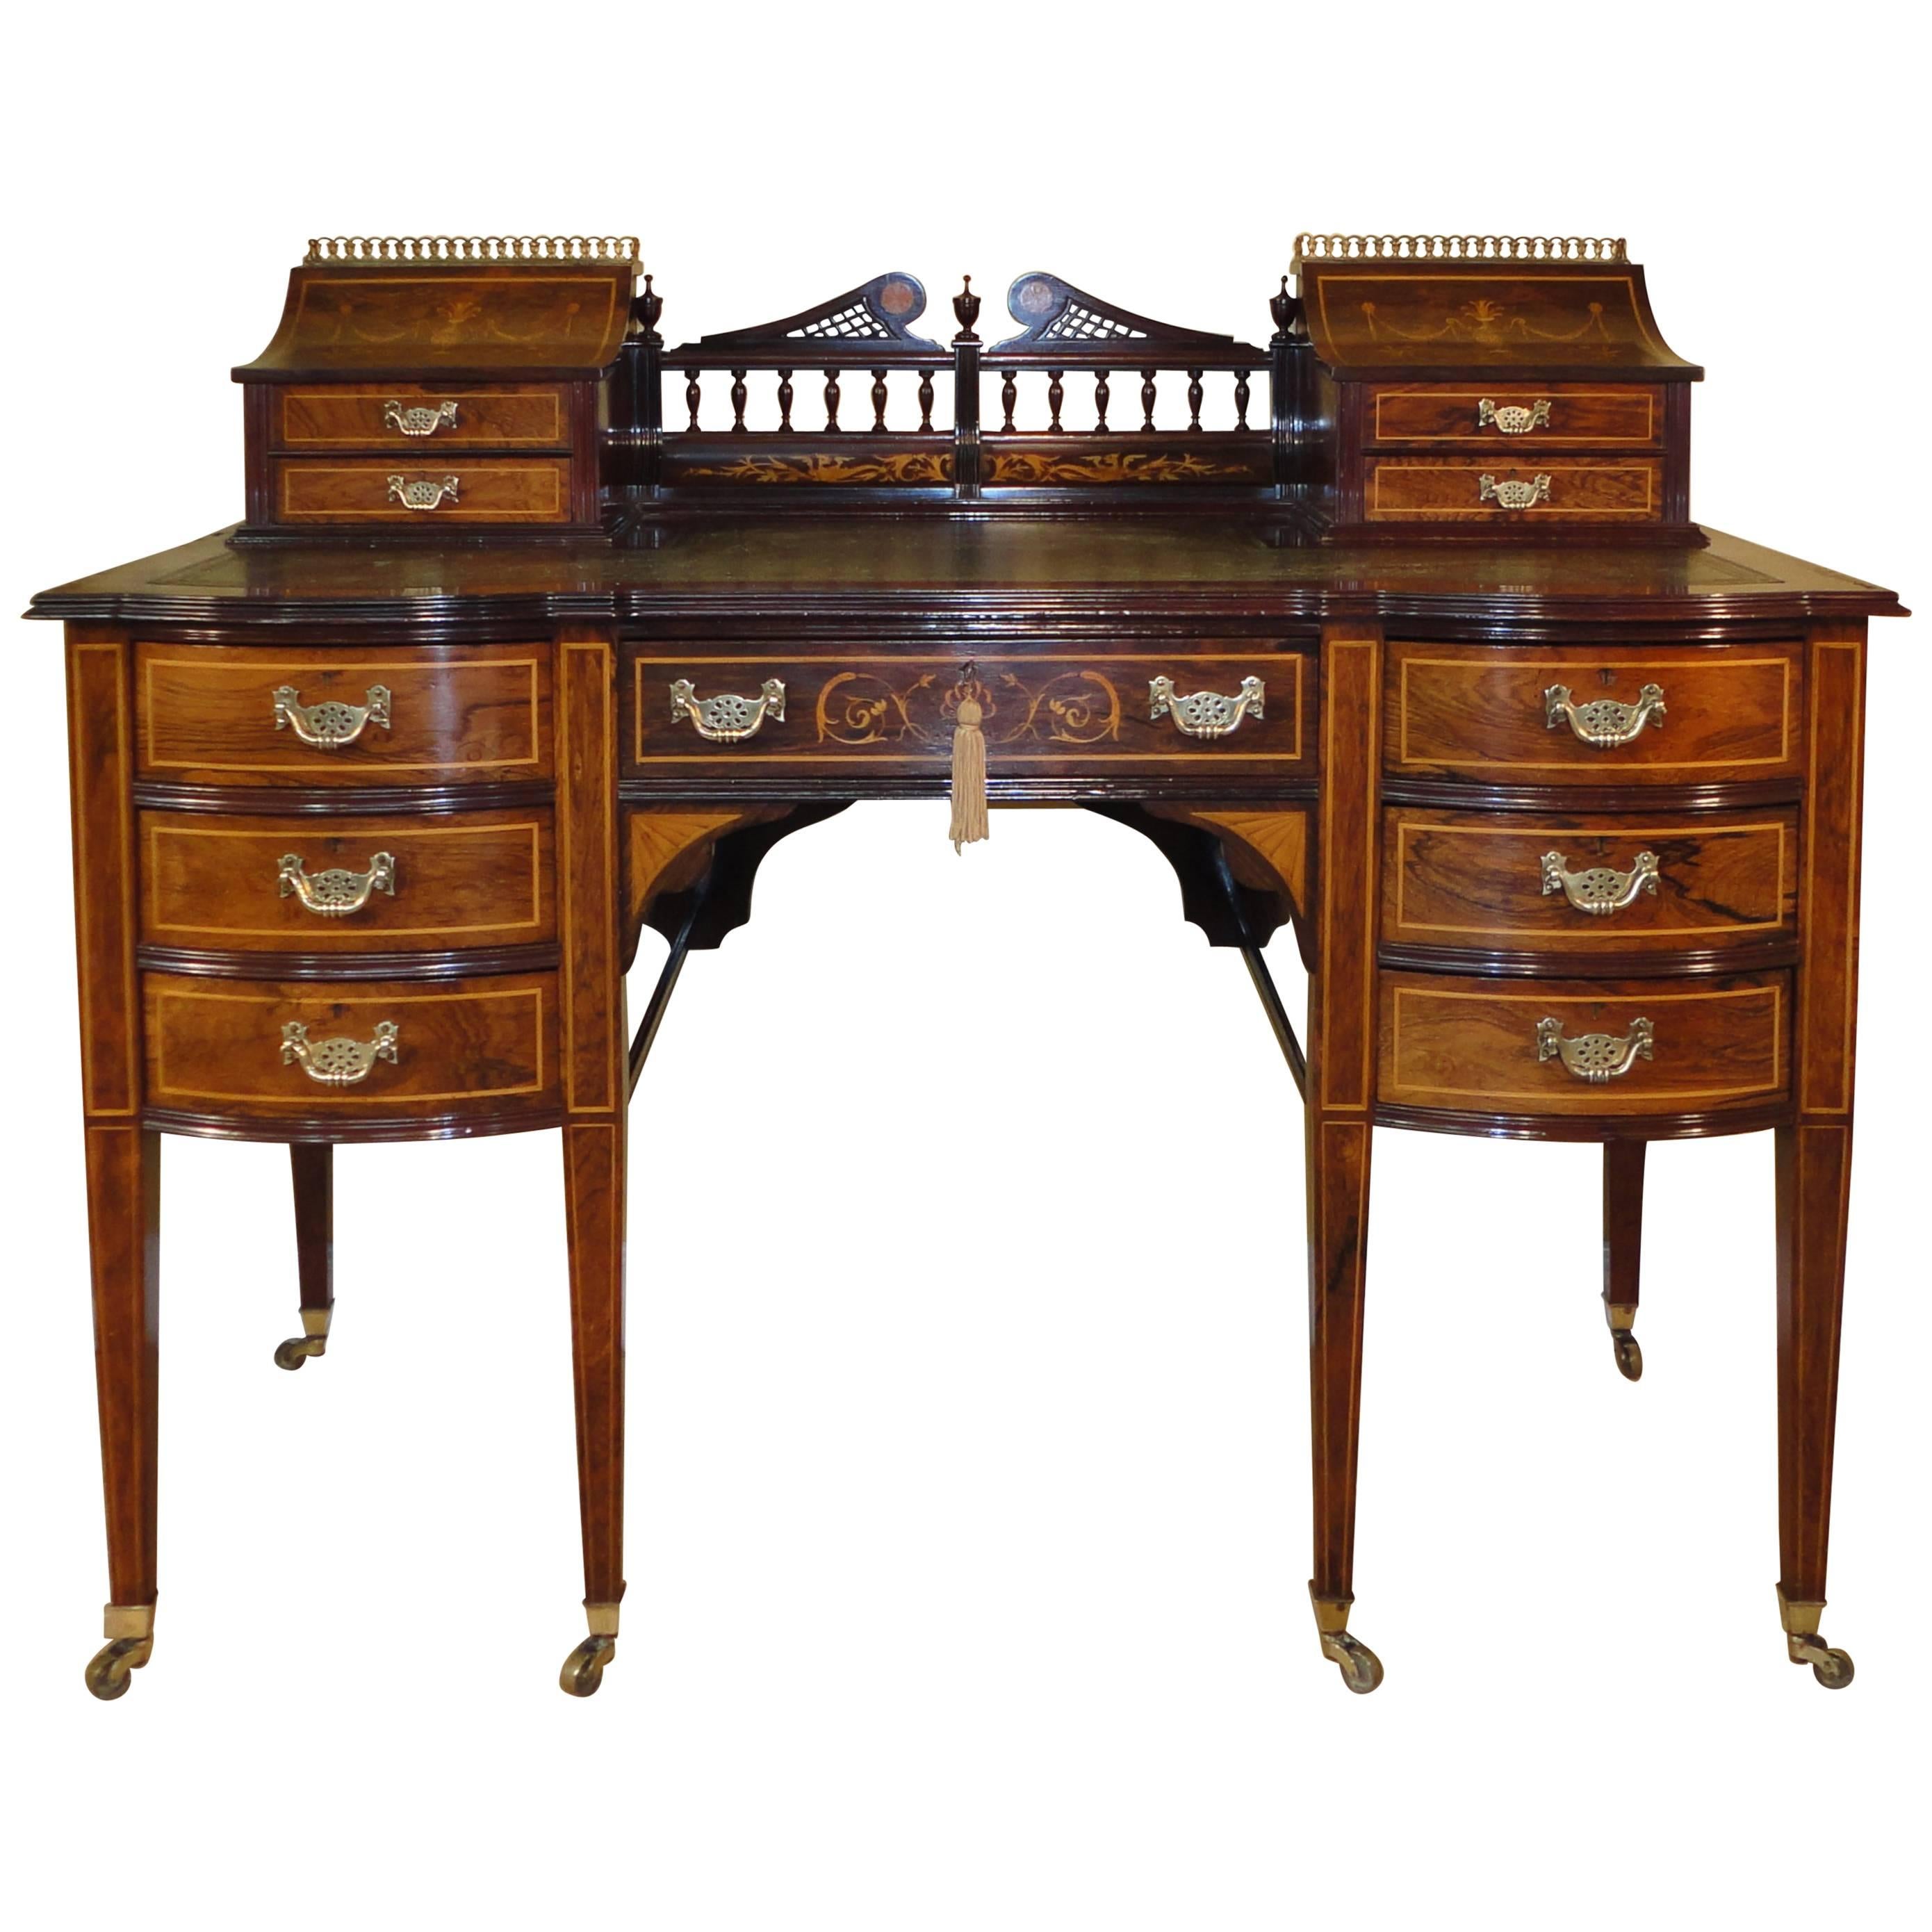 Sheraton Revival Rosewood and Marquetry Inlaid Desk, 19th Century For Sale